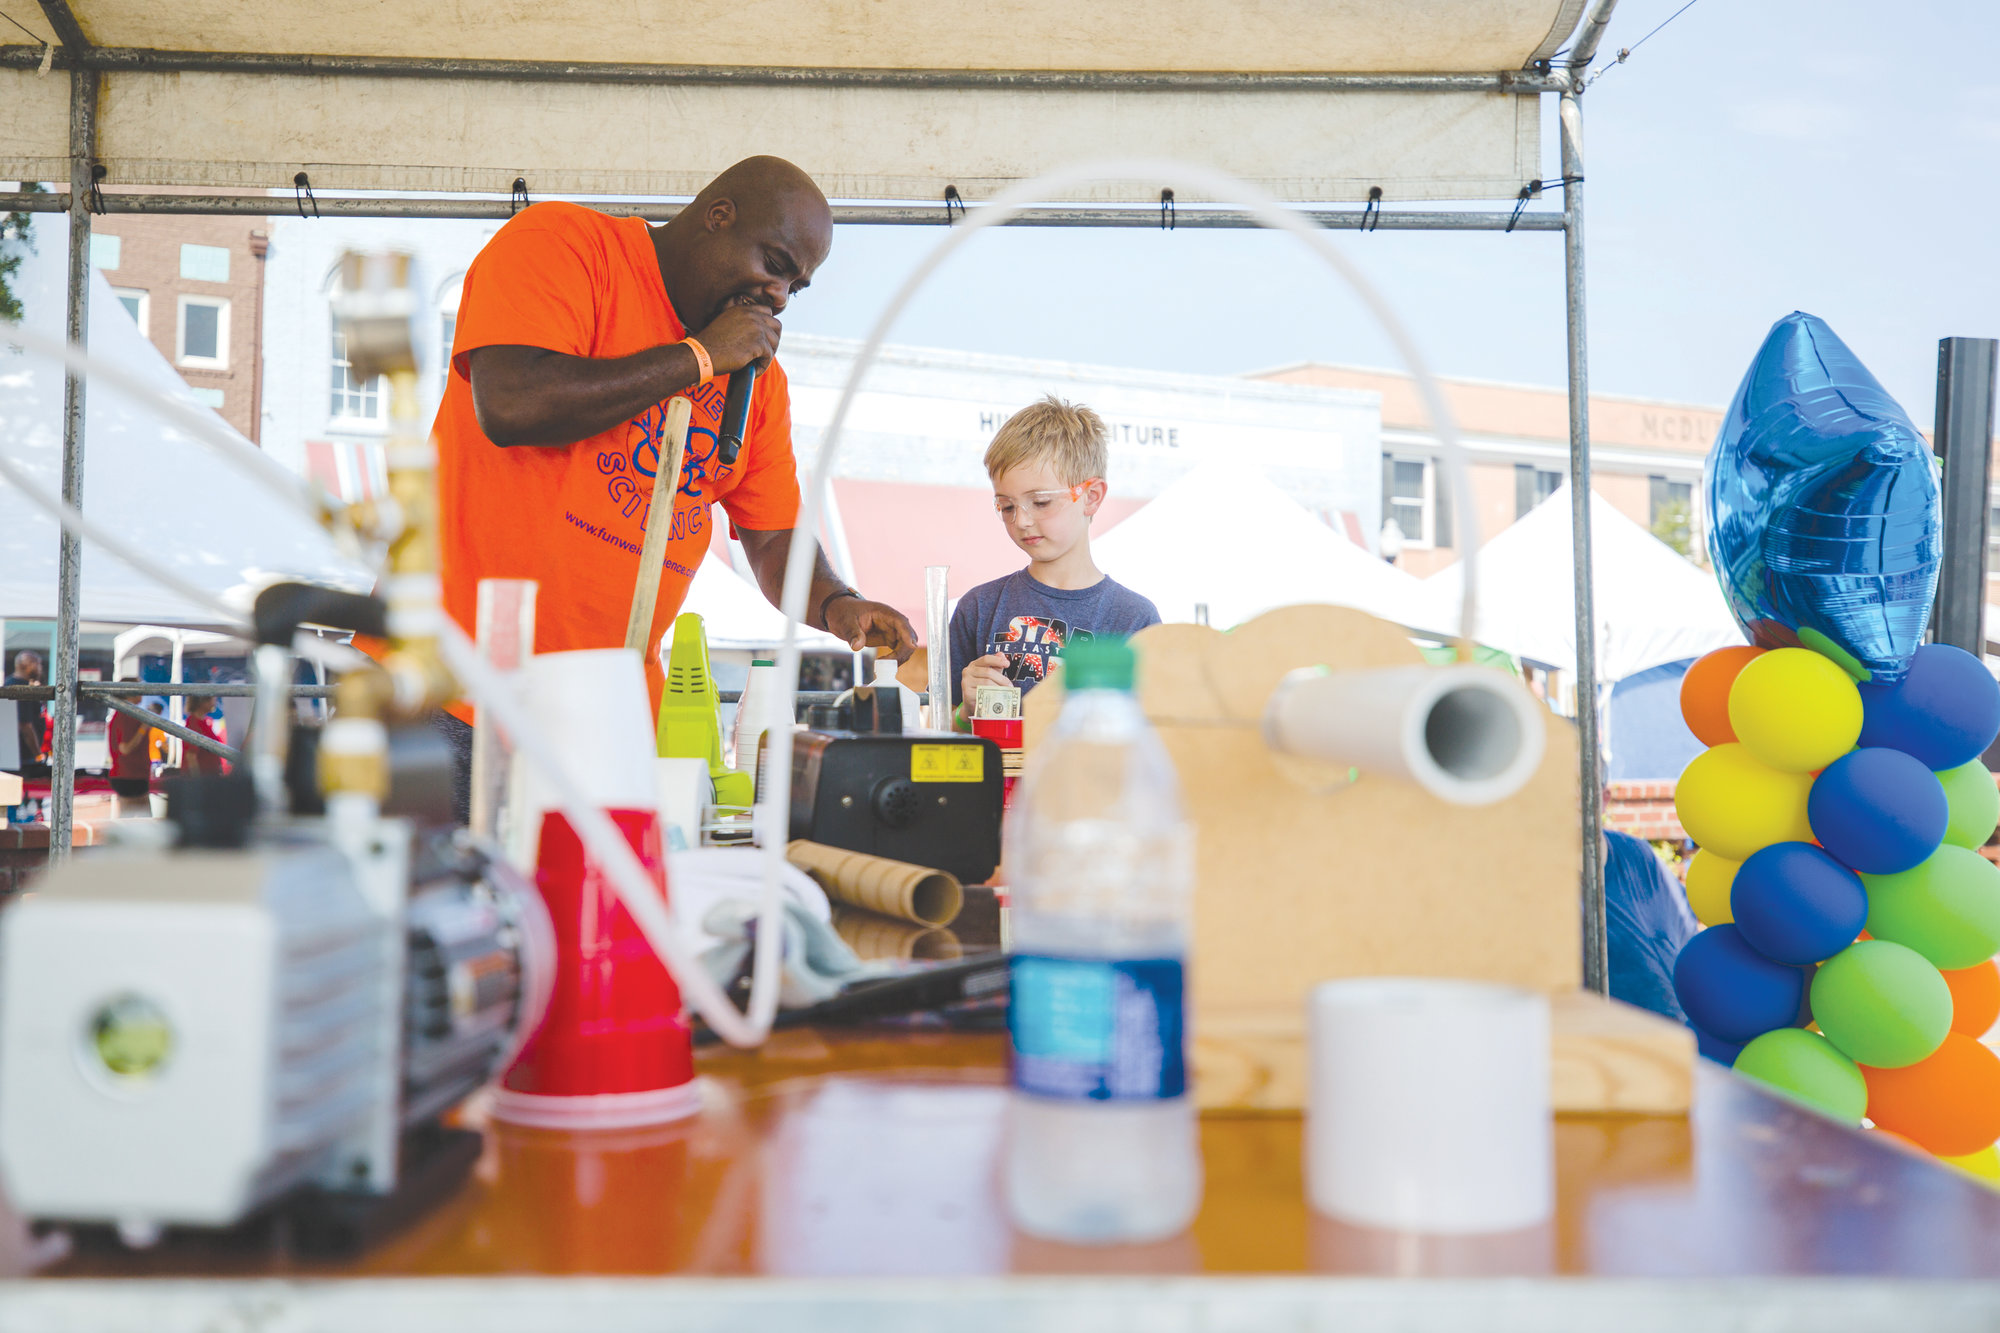 Children and parents participated in Sumter's first eSTEAM Festival downtown on South Main Street and the Central Carolina Technical College's Health Sciences parking lot on Oct. 6.